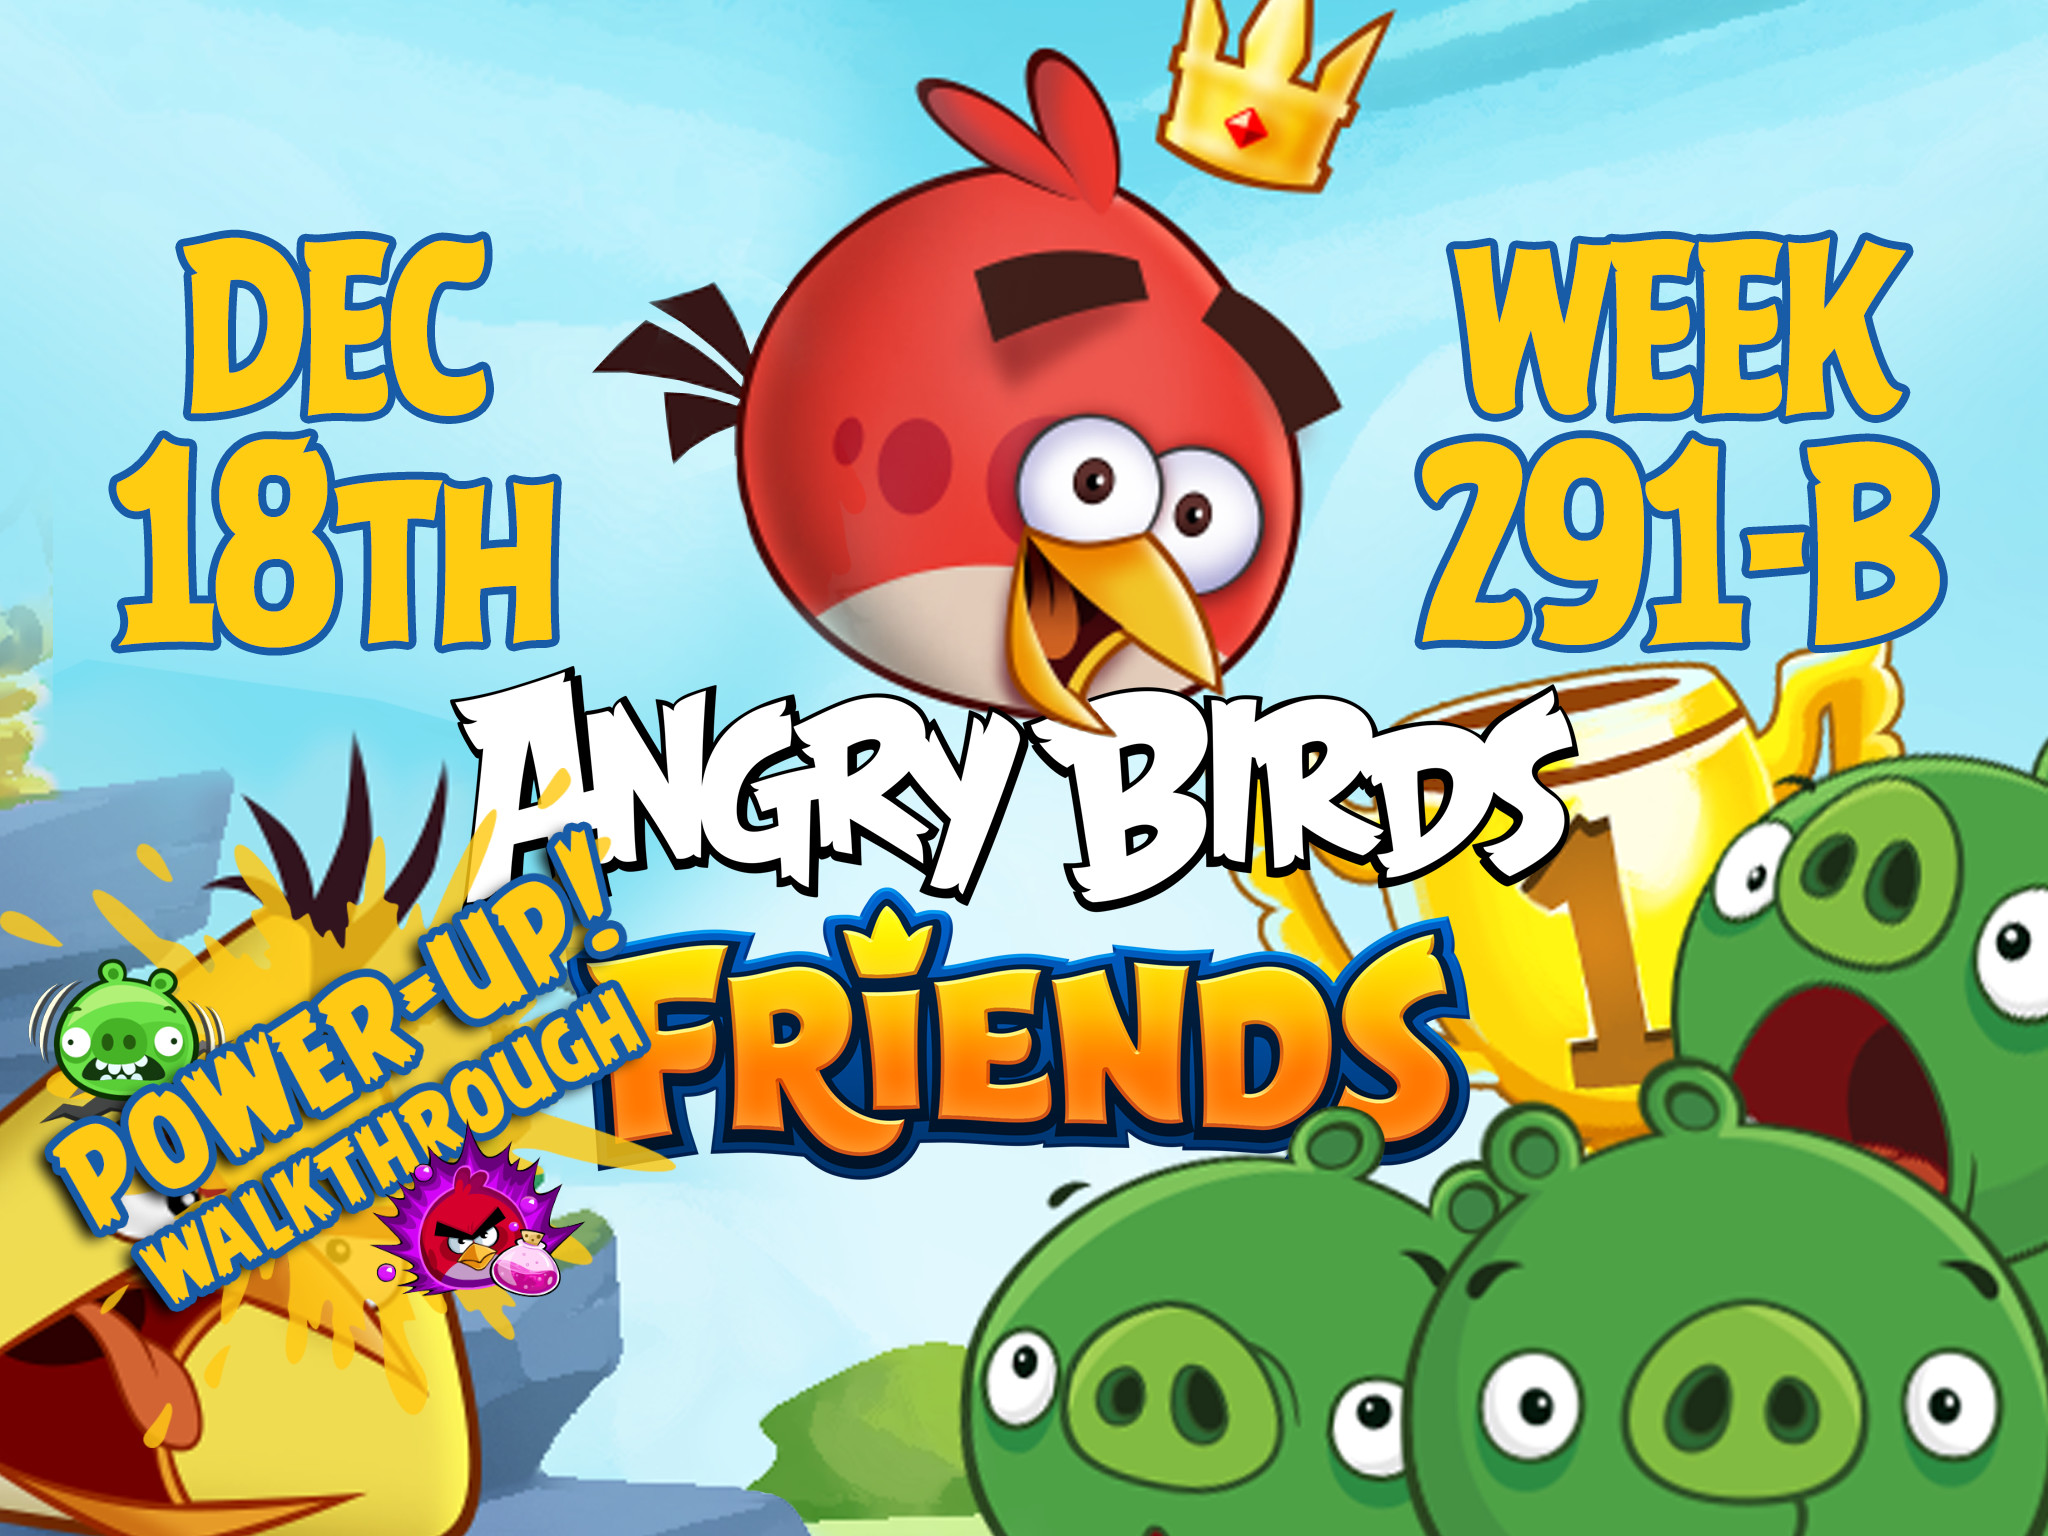 Angry Birds Friends Tournament Week 291-B Feature Image PU